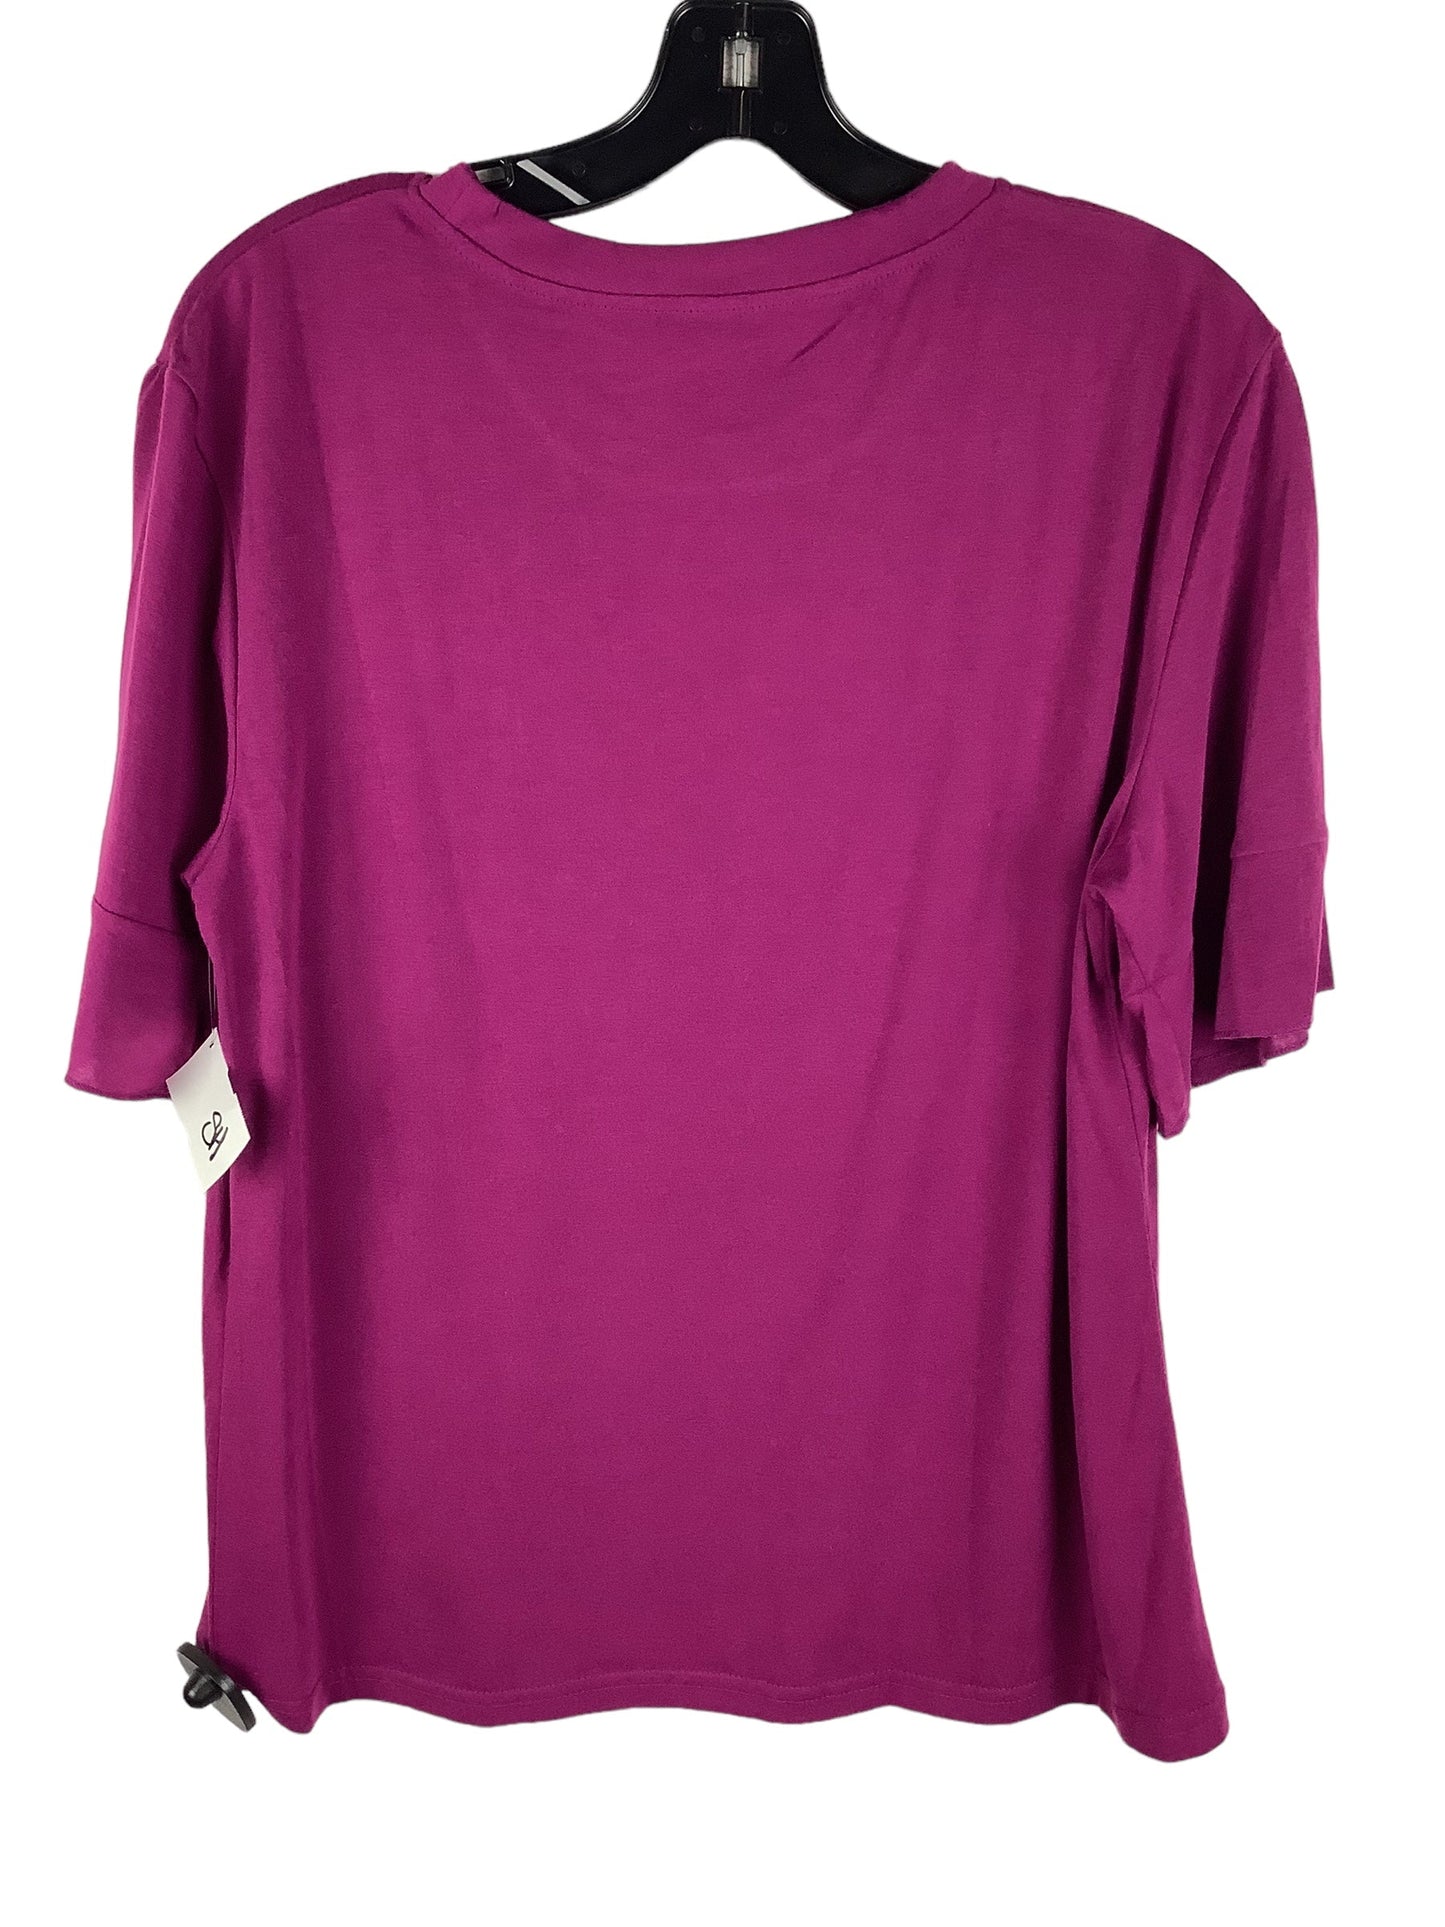 Purple Top Short Sleeve Clothes Mentor, Size M